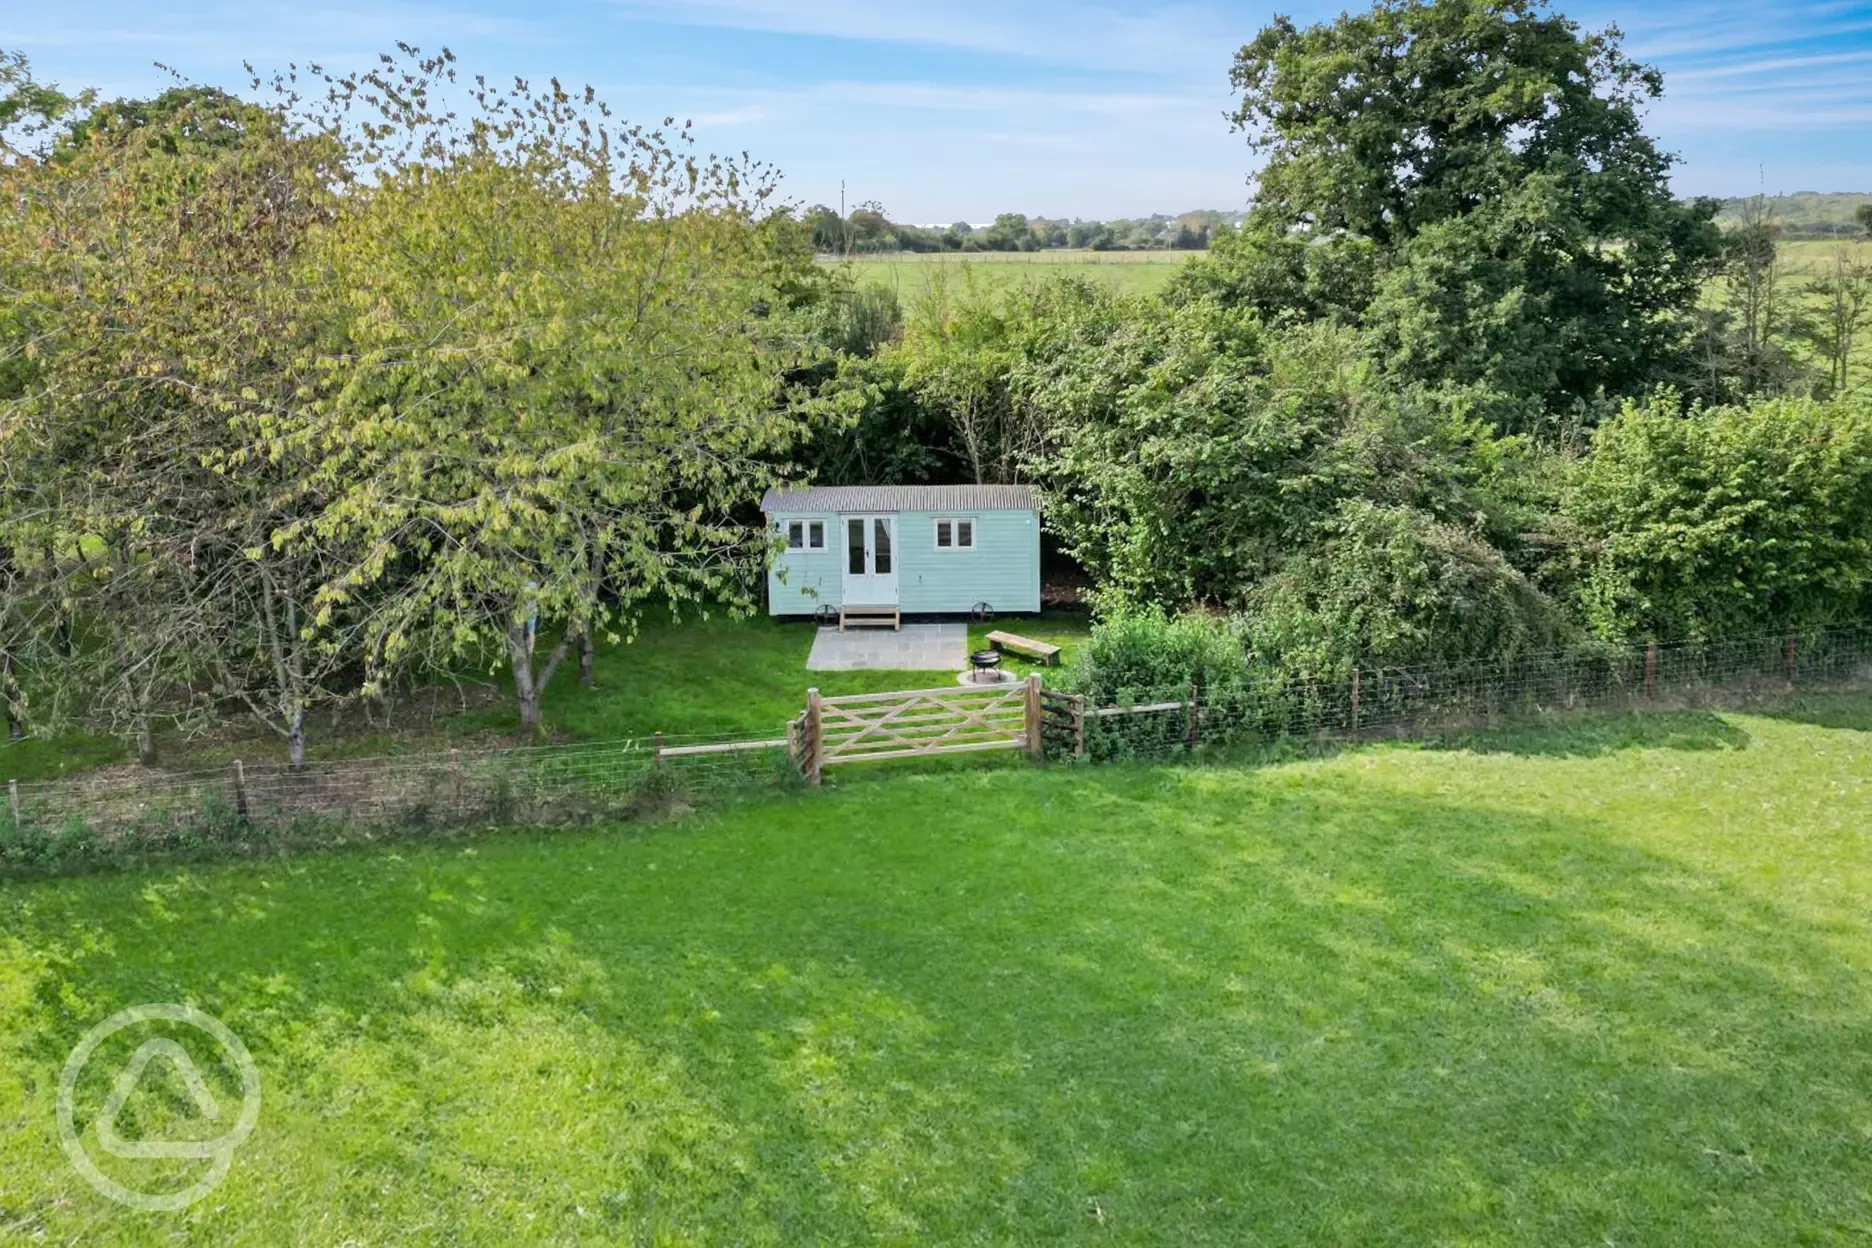 Aerial of the shepherd's hut and countryside setting